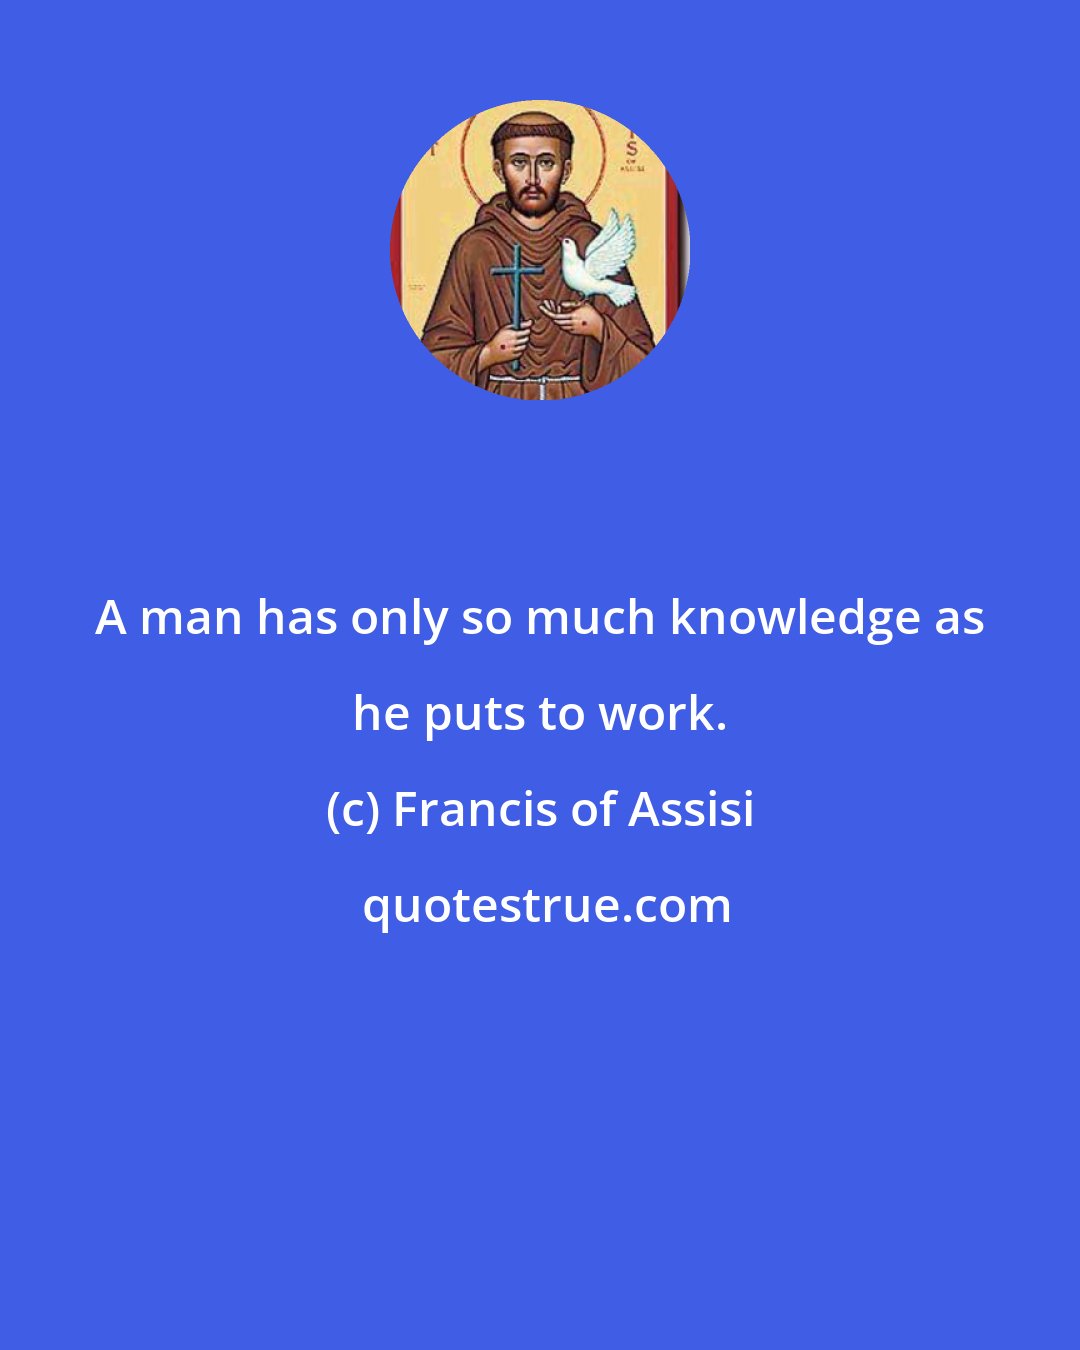 Francis of Assisi: A man has only so much knowledge as he puts to work.